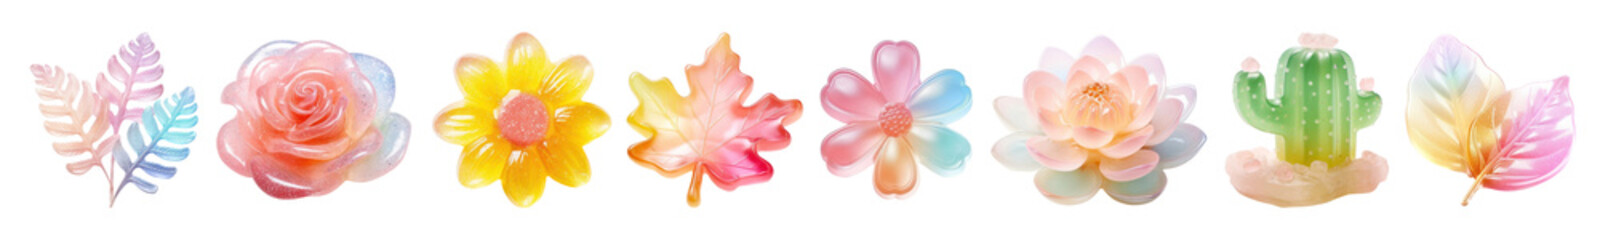 Poster - 3d flowers and plants png element set on transparent background